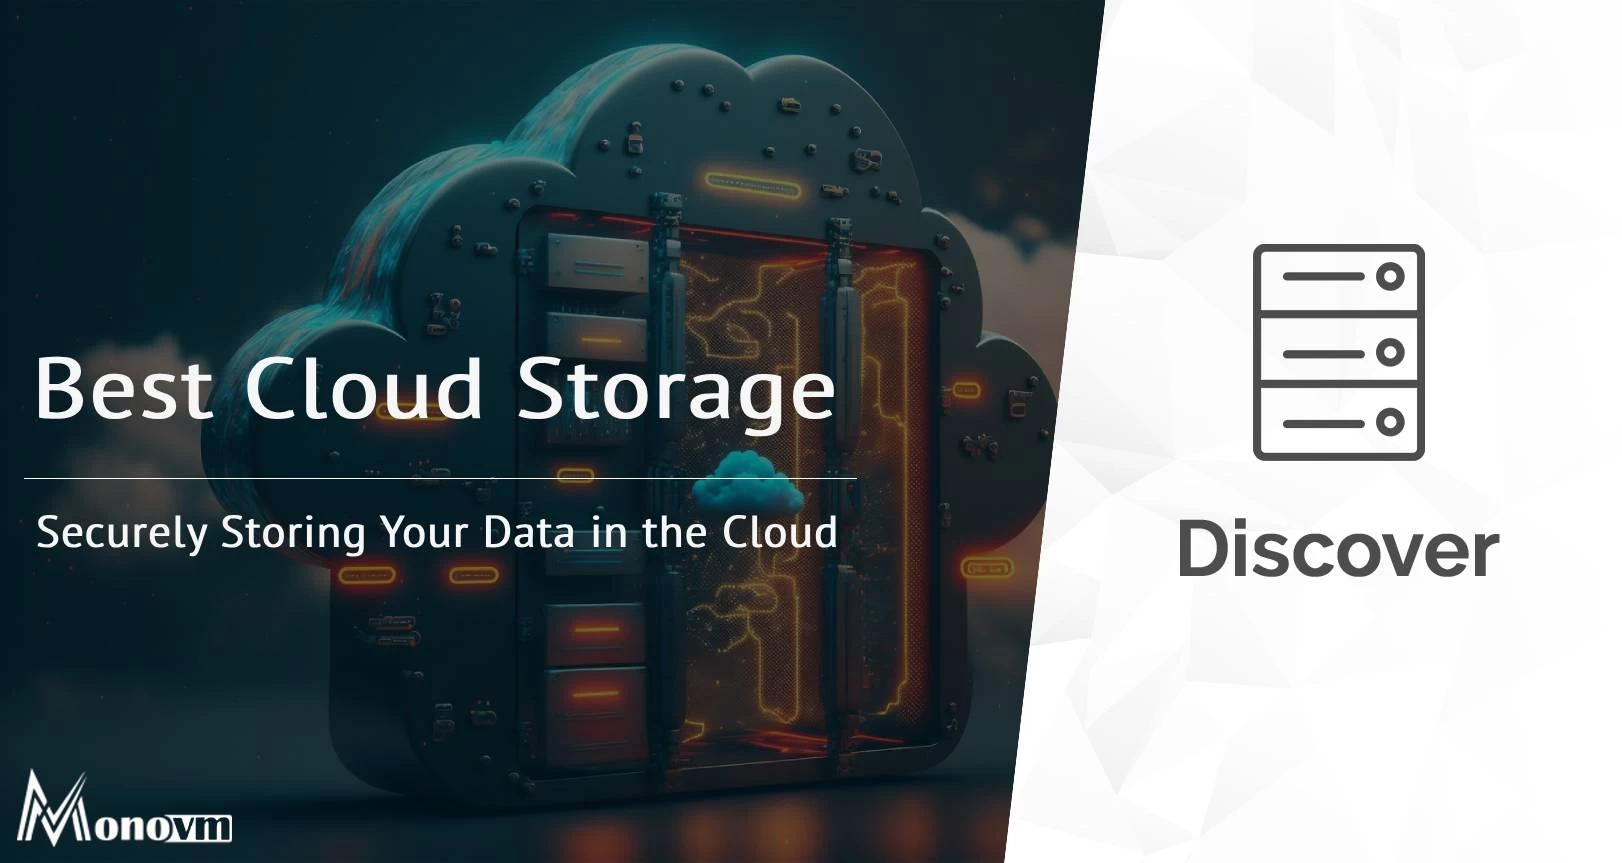 Best Cloud Storage: Securely Storing Your Data in the Cloud